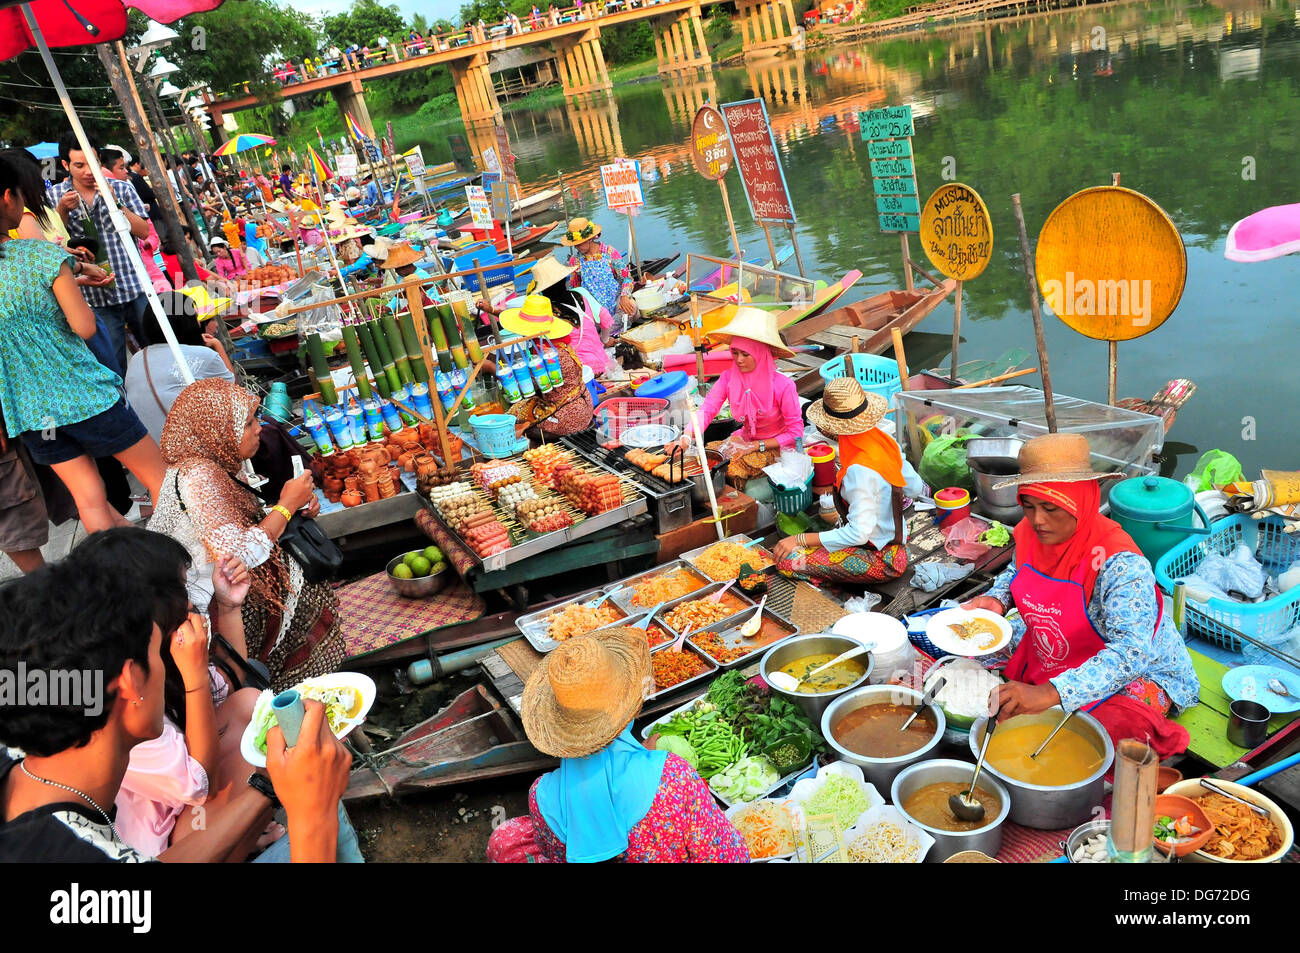 Thailand Floating Markets - Klong Hae Floating Market located in Hat Yai district in Southern Thailand Stock Photo